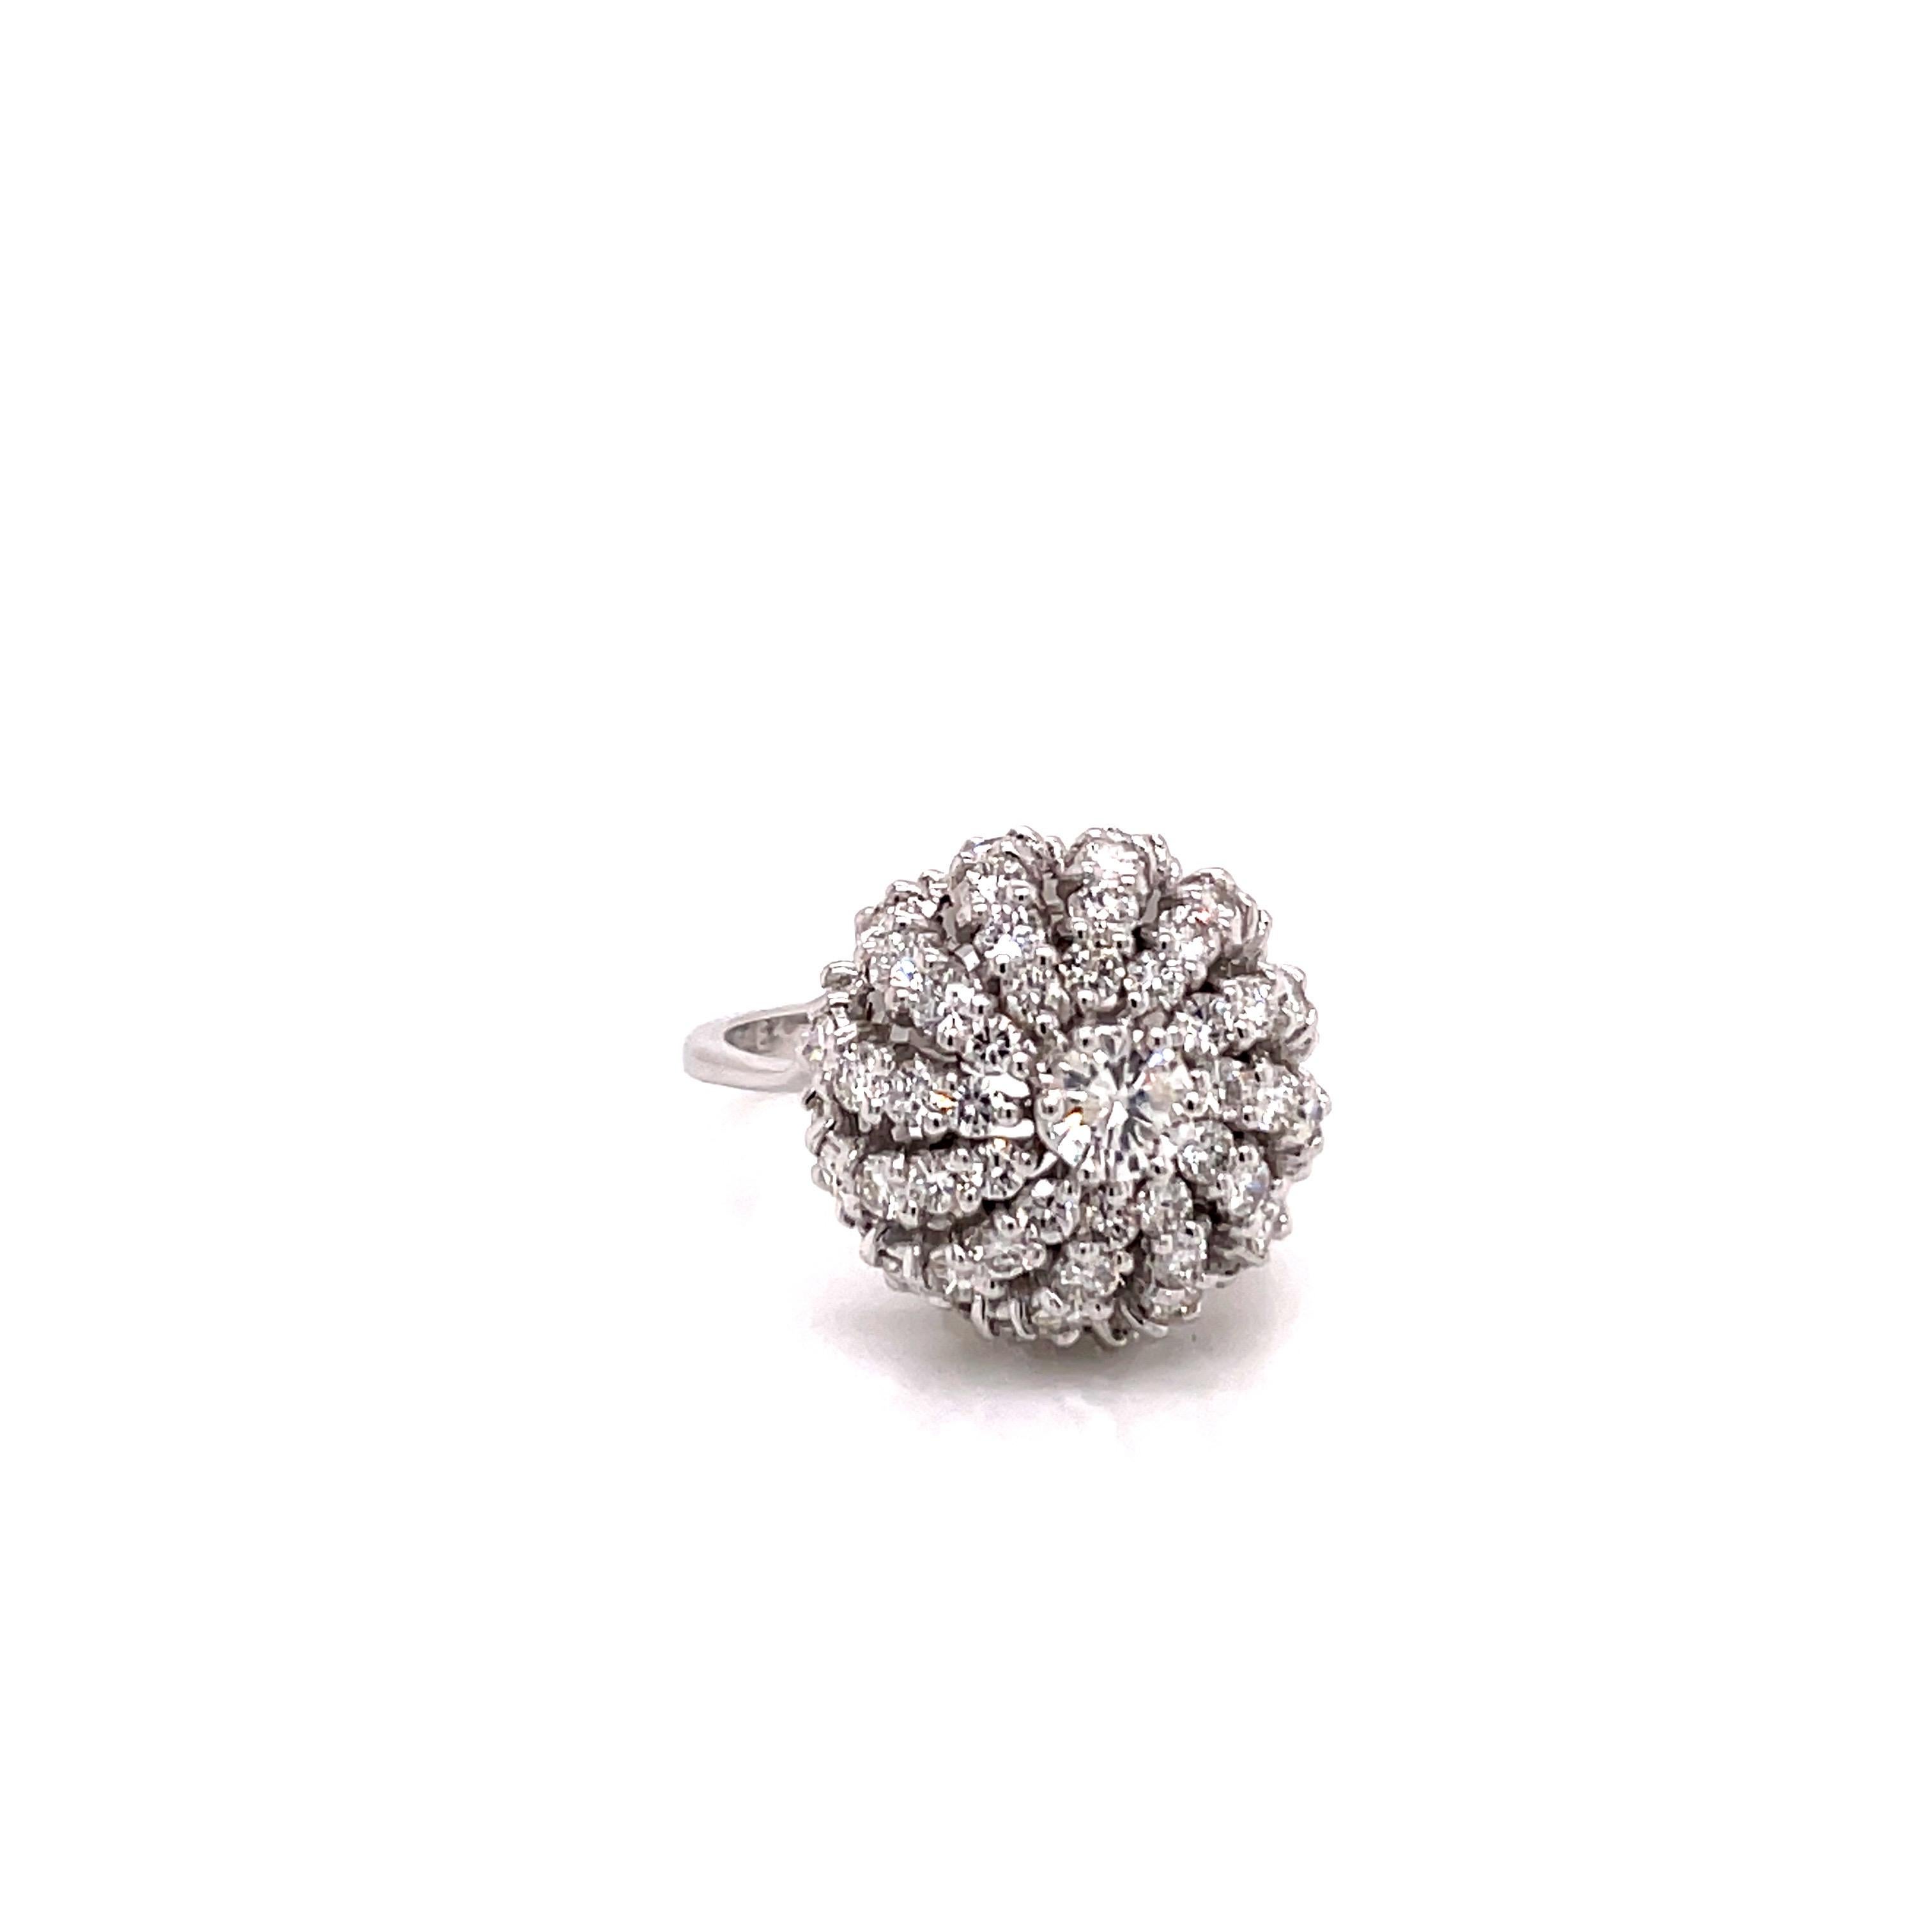 Vintage 18K White Gold Diamond Flower Cocktail Ring - The ring contains 1 round brilliant diamond on the top weighing approximately .36ct with H color and I1 clarity (no black inclusion). Surrounding the center are 60 round brilliant diamonds which